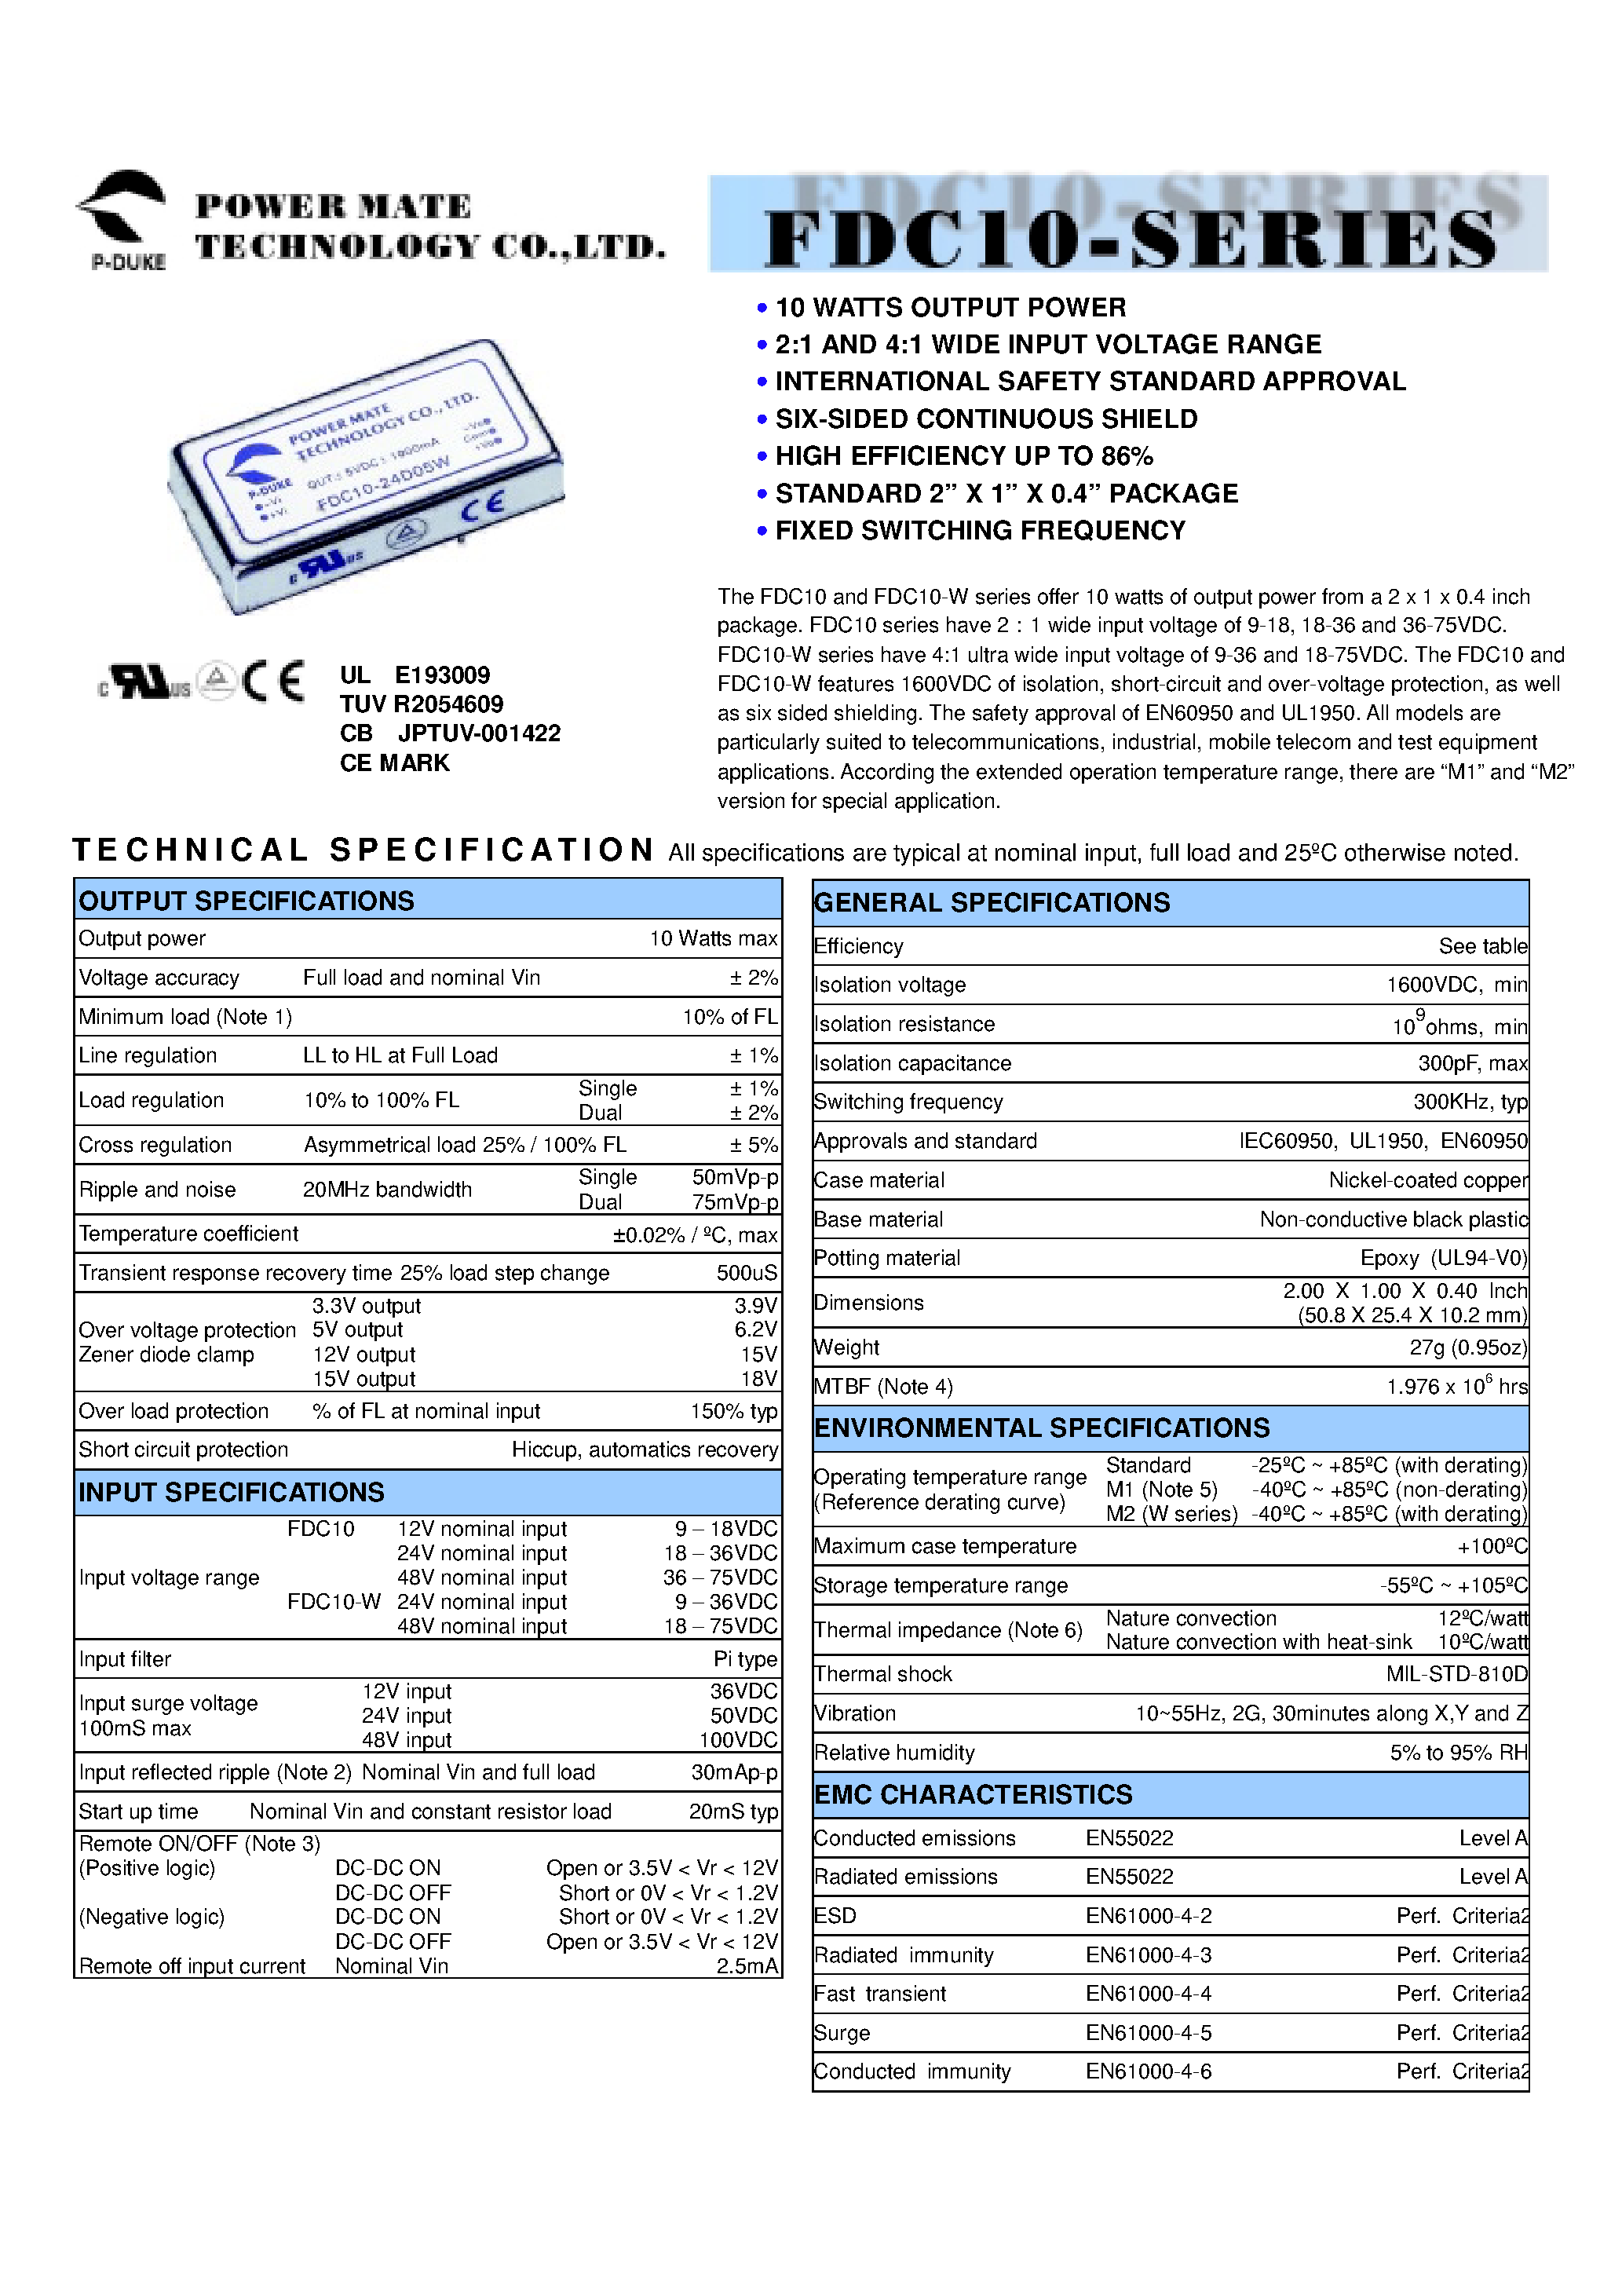 Datasheet FDC10 - 10 watts of output power from a 2 x 1 x 0.4 inch package page 1